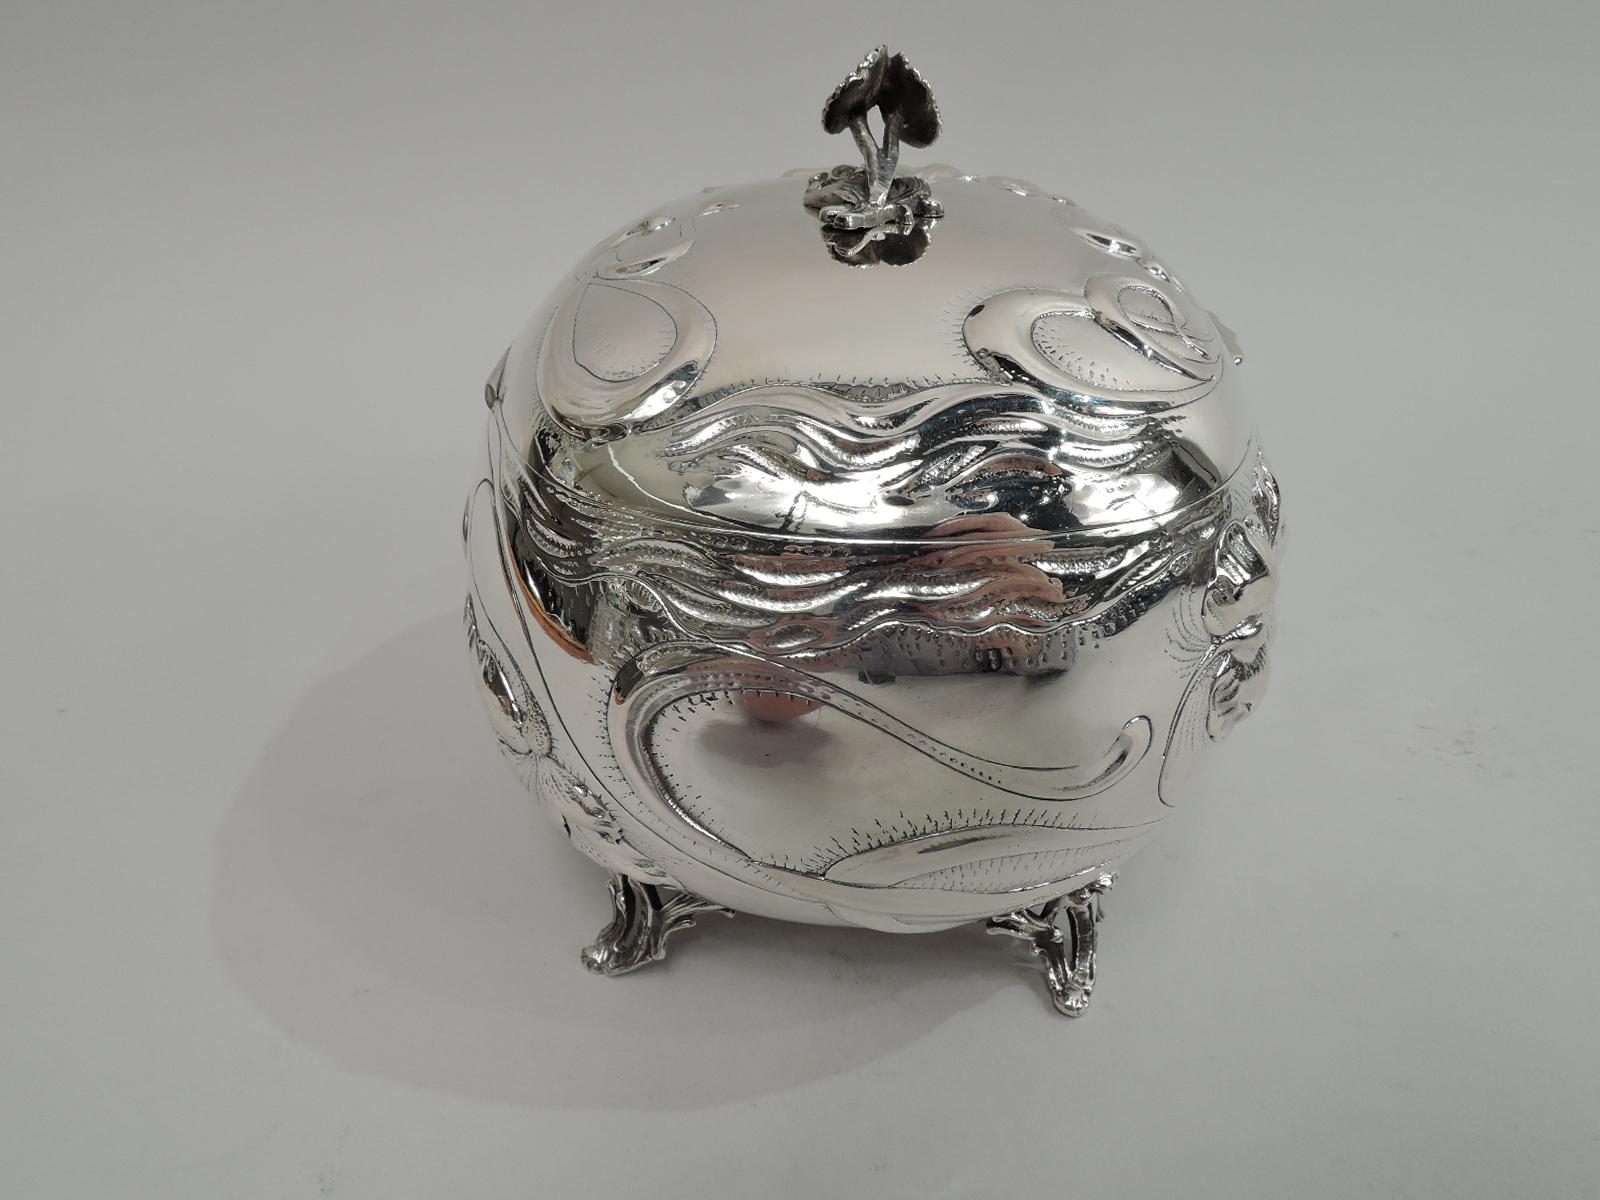 Turn-of-the-century Austrian 800 silver keepsake box. Rectangular with curved sides and open scrolled corner supports. Cover hinged with scalloped tab and flower finial. Chased ornament: Loose and floaty flowers as well as whiplash tendrils and wavy